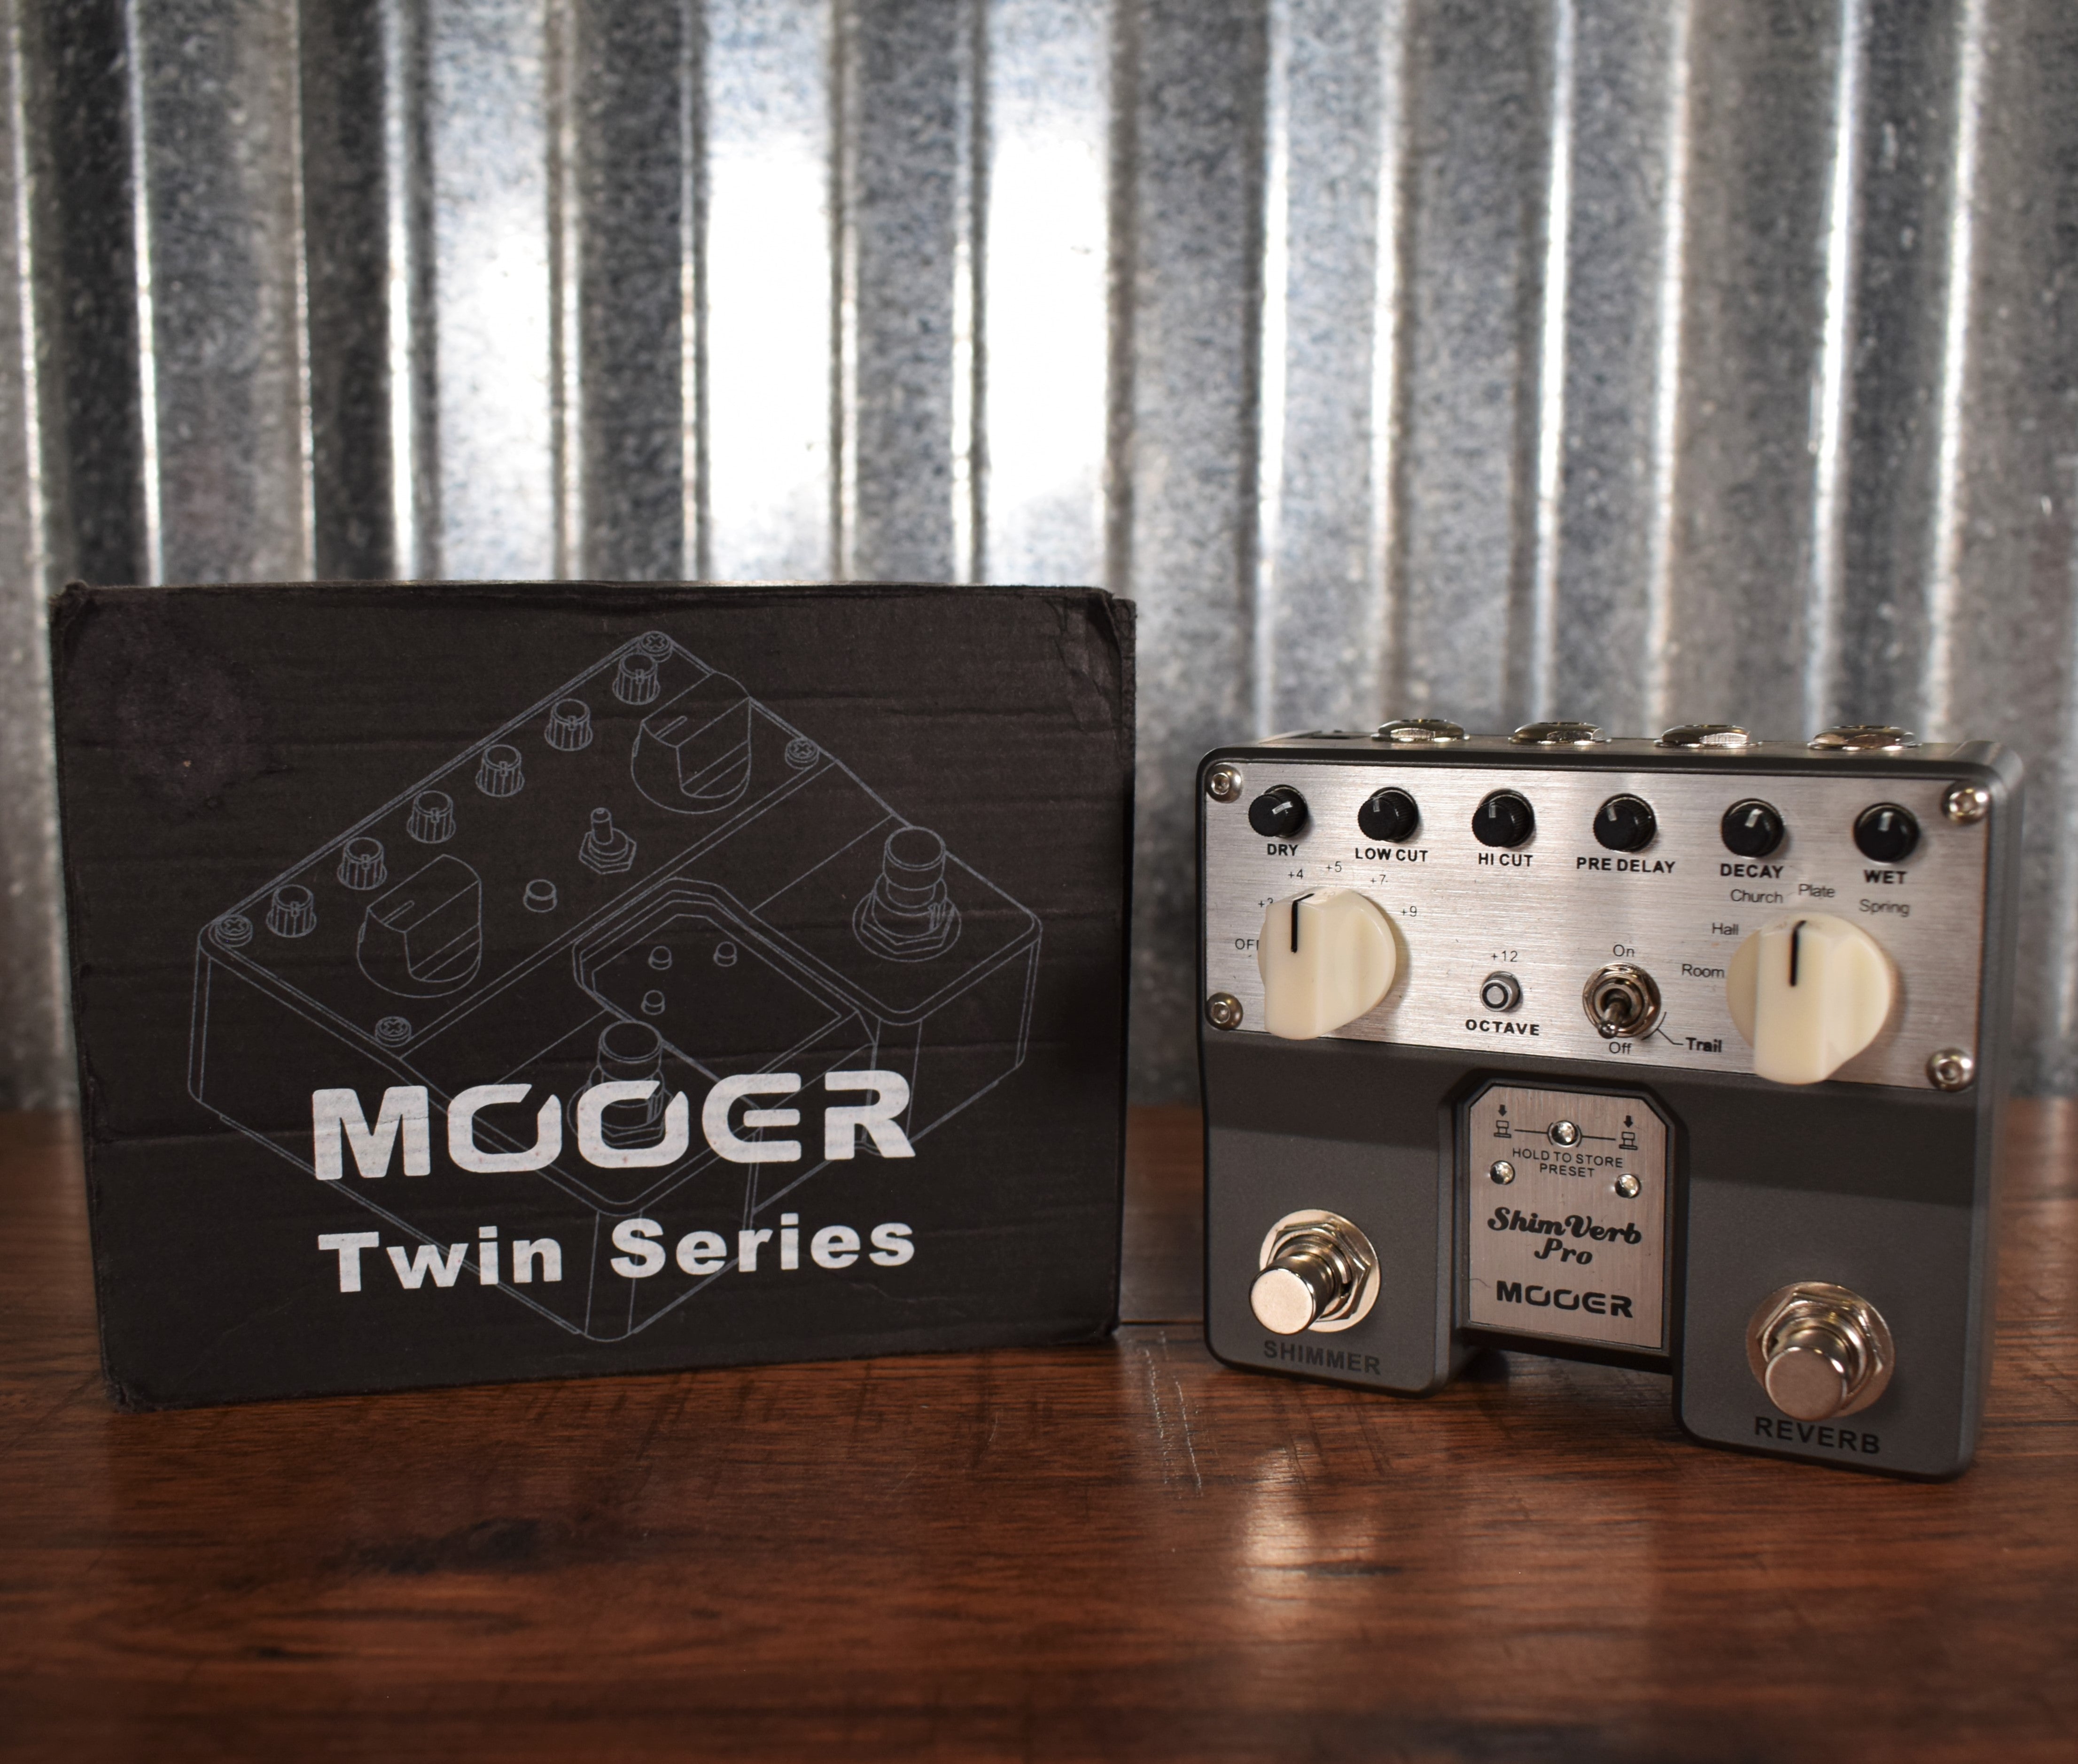 Mooer Audio TVR-1 Twin Series Shim Verb Pro Guitar Reverb Effect